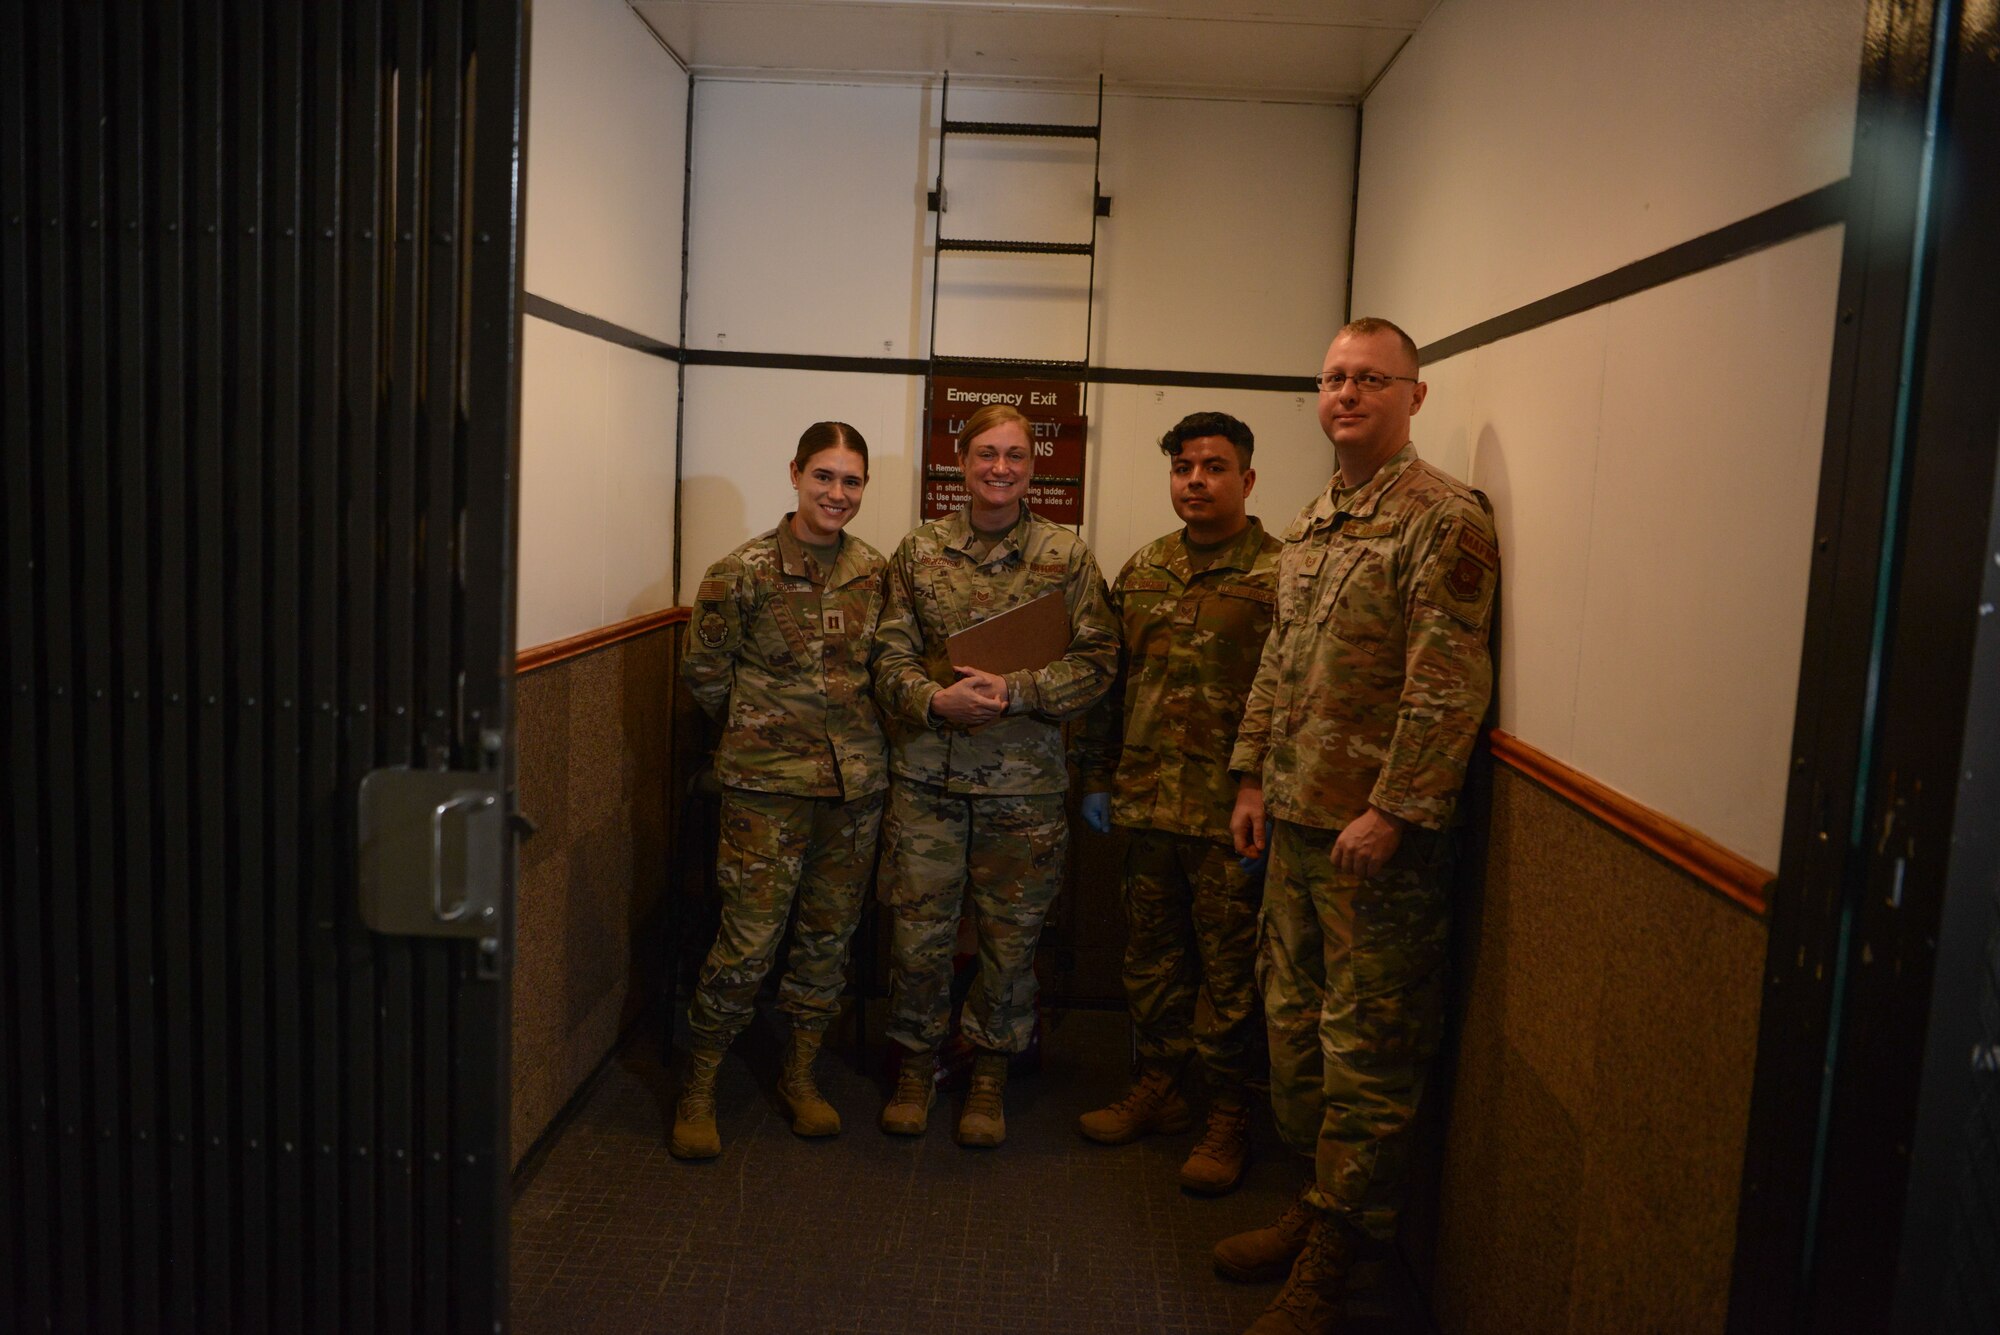 Airmen from the U.S. Air Force School of Aerospace Medicine, the 5th Operational Medical Readiness Squadron, and the 742nd Missile Squadron pose for a photo at a missile alert facility (MAF), near Minot Air Force Base, North Dakota, July 25, 2023. The team assessed indoor air quality at each facility to include temperature, humidity, carbon dioxide and carbon monoxide levels. as part of the ongoing “Missile Community Cancer Study,” air, water and soil quality will be tested at all the missile alert facilities within Air Force Global Strike Command’s three operational intercontinental ballistic missile wings for potential occupational hazards. USAFSAM is part of the Air Force Research Laboratory’s 711th Human Performance Wing.